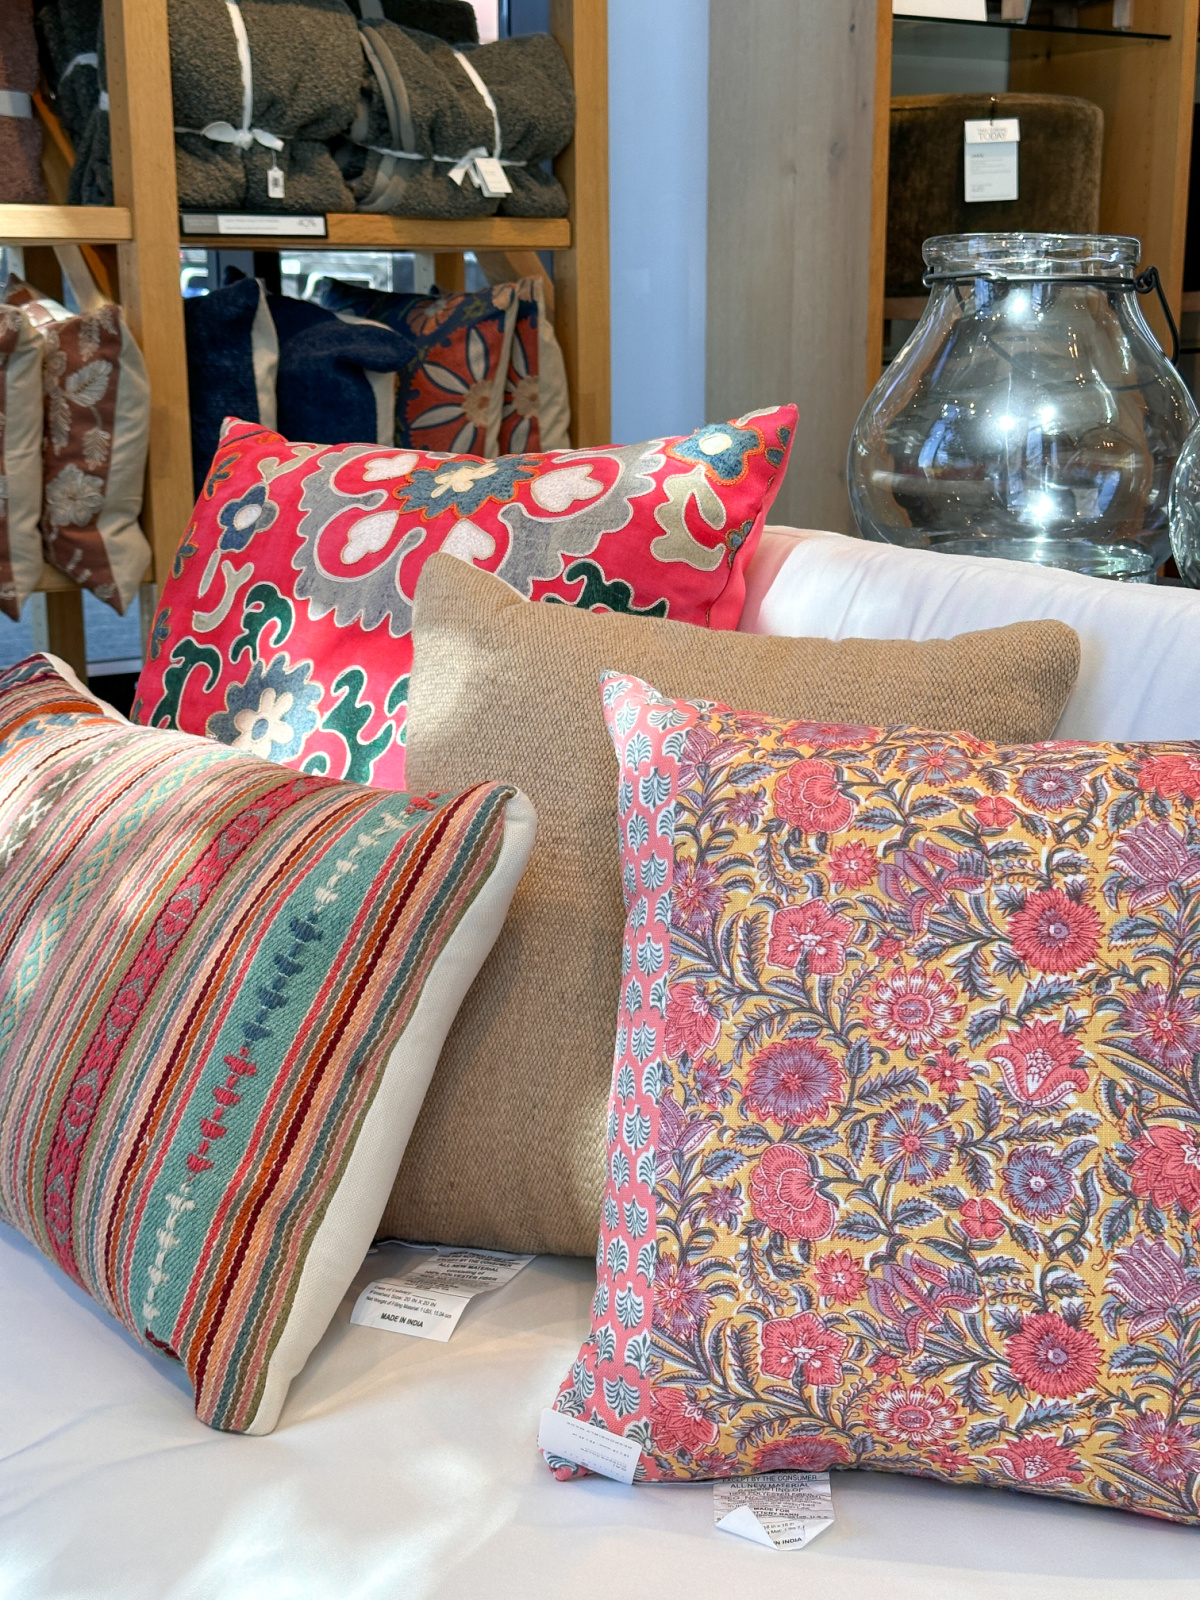 Colorful outdoor pillow display on sofa at Pottery Barn store.